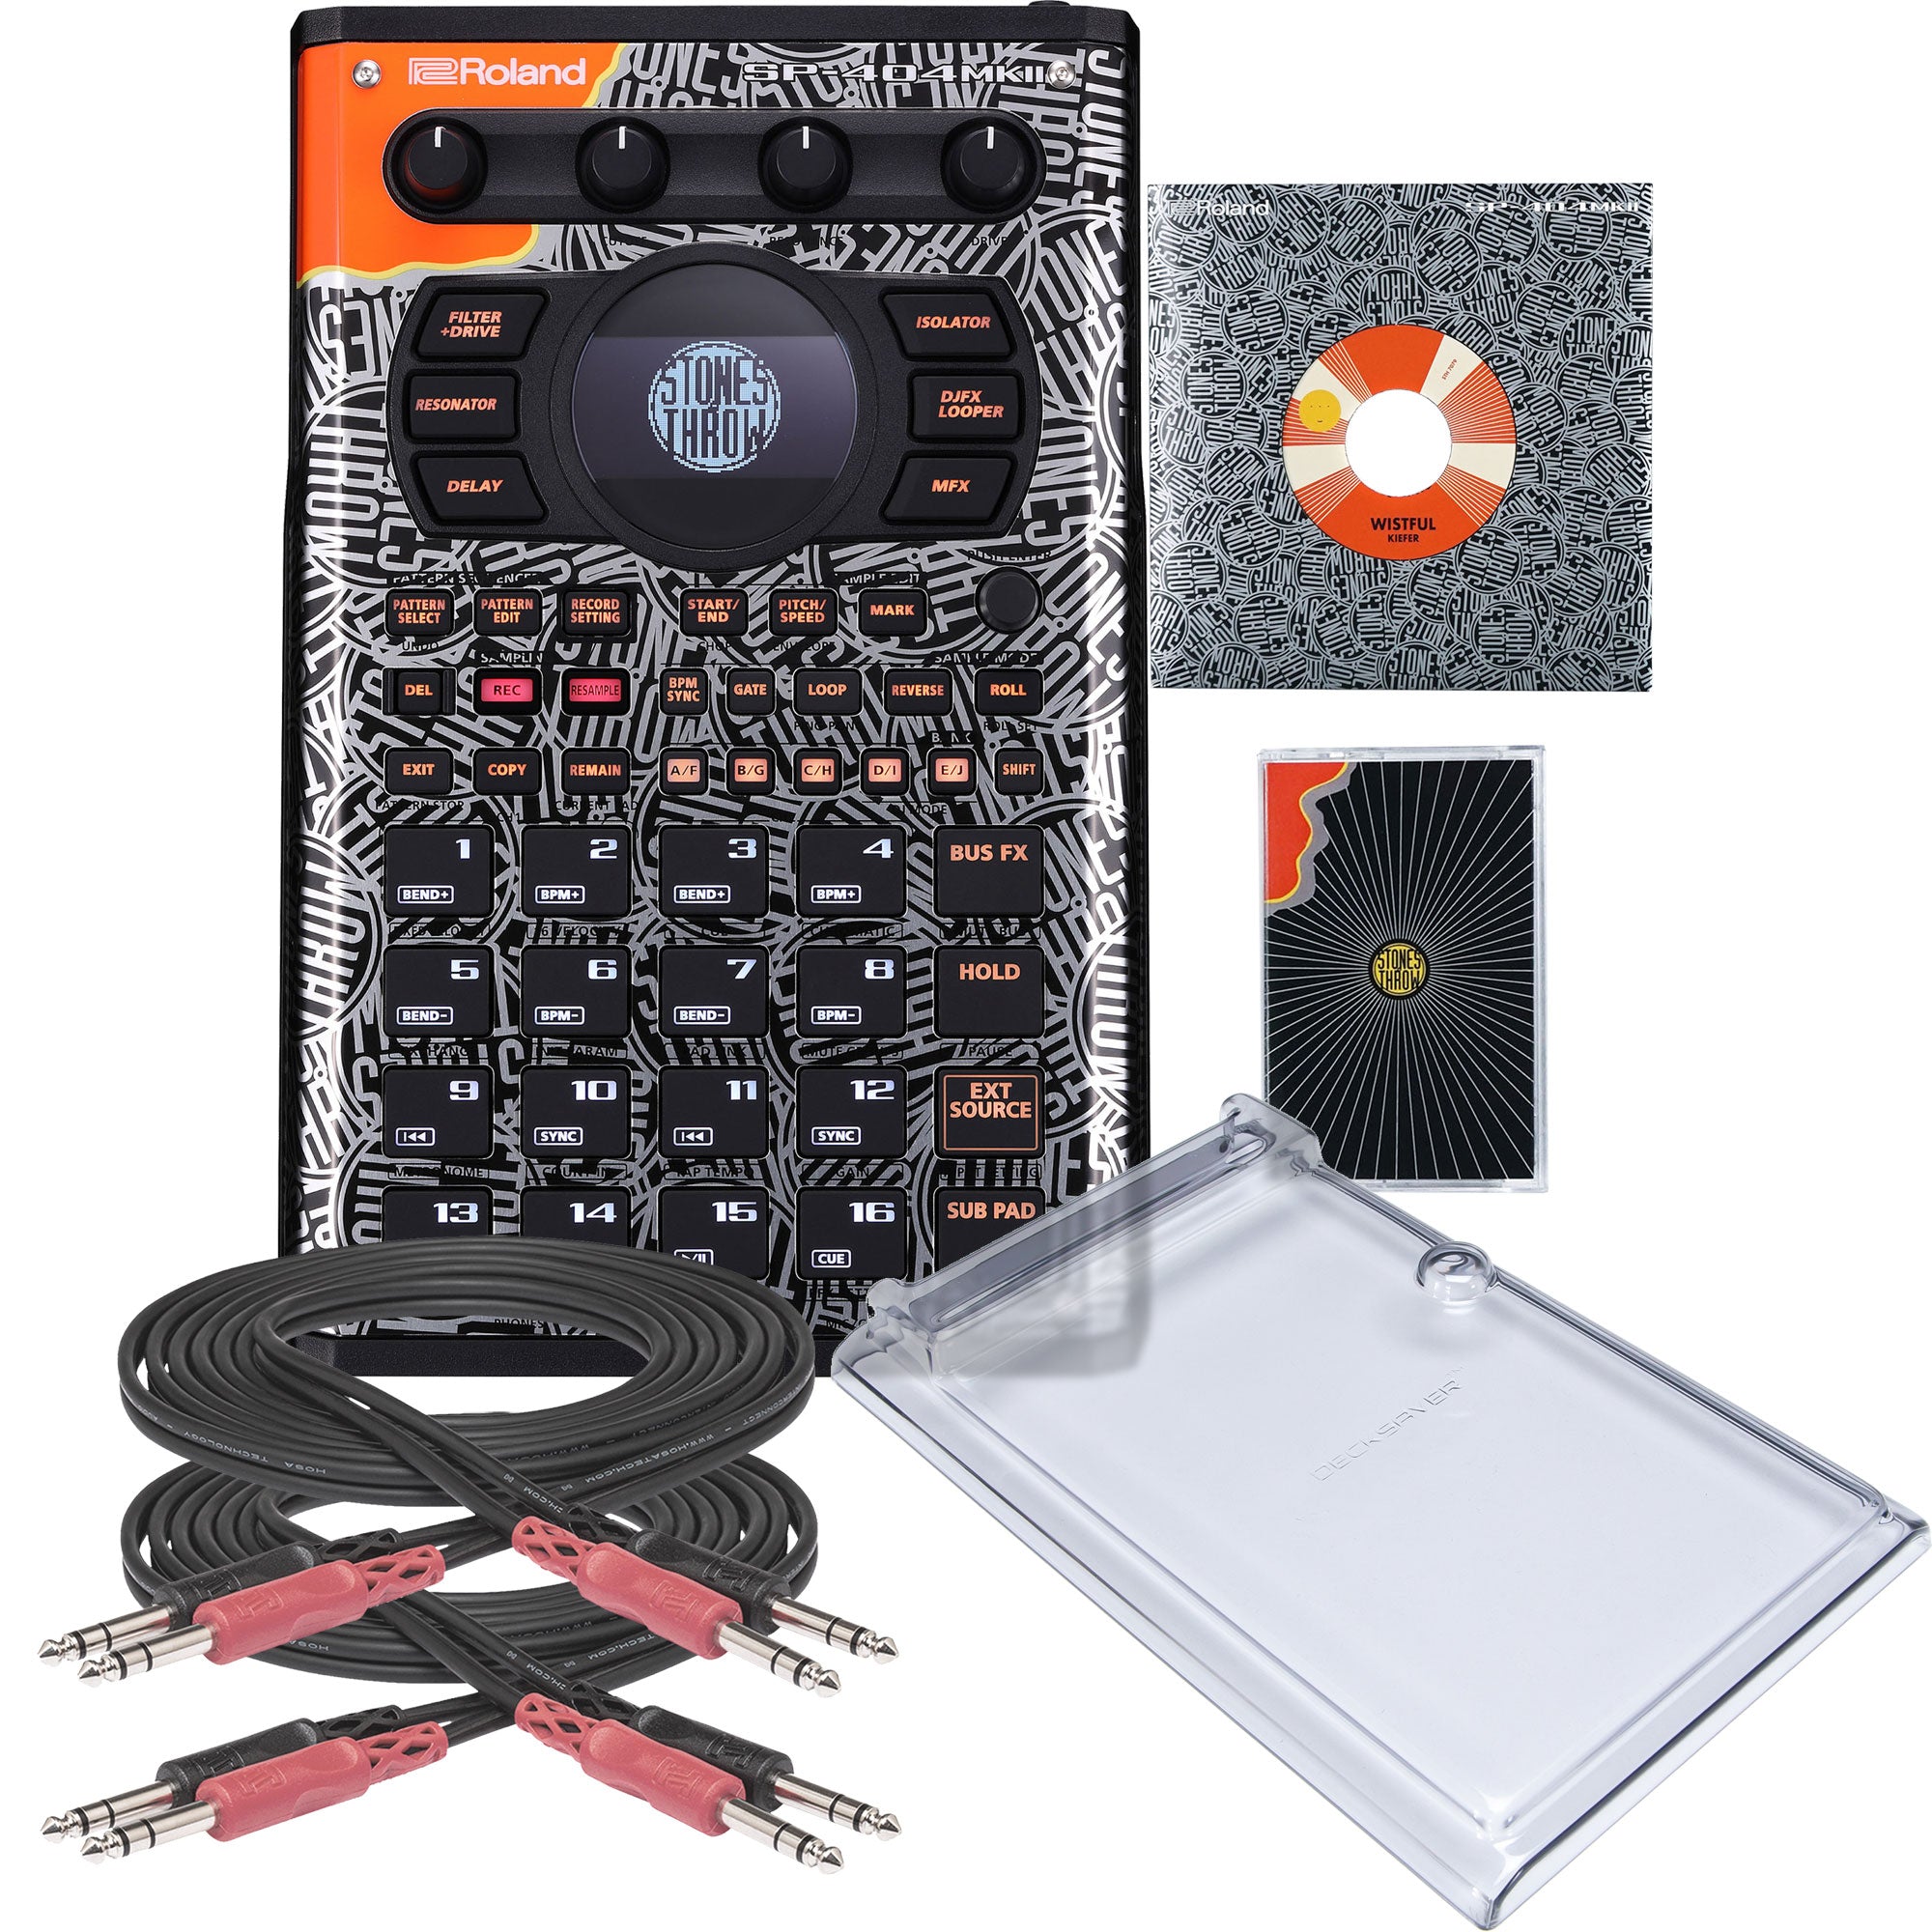 Collage showing components in Roland SP-404MKII Stones Throw Limited Edition DECKSAVER KIT